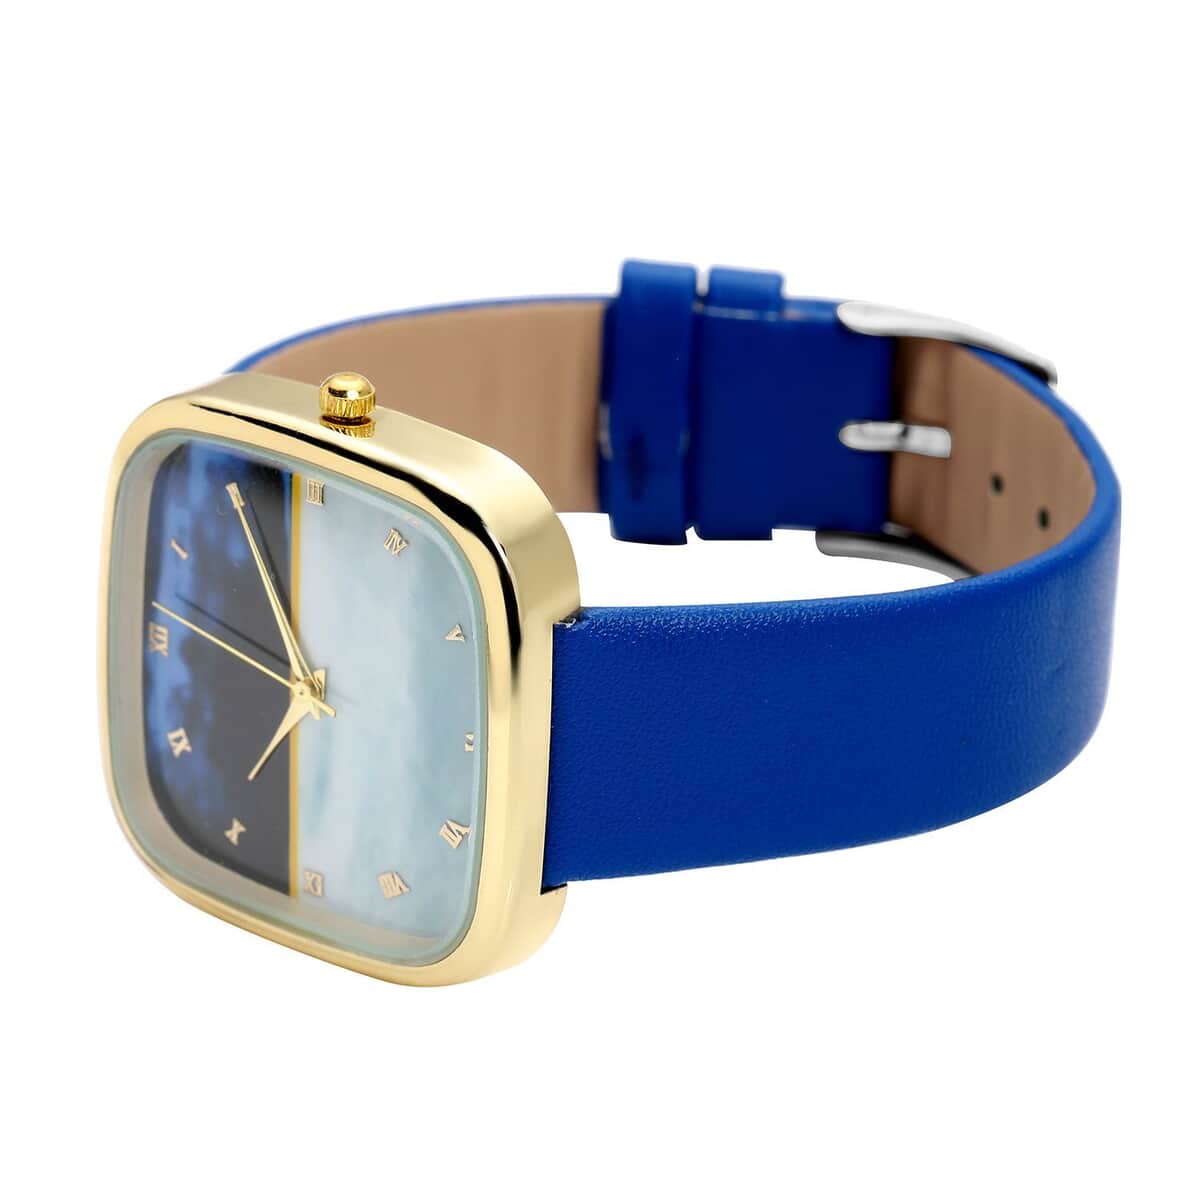 Strada Japanese Movement 3D Simulated Lapis Dial Watch in Blue Faux Leather Strap (35.80mm) (5.5-7.5 Inches) image number 4